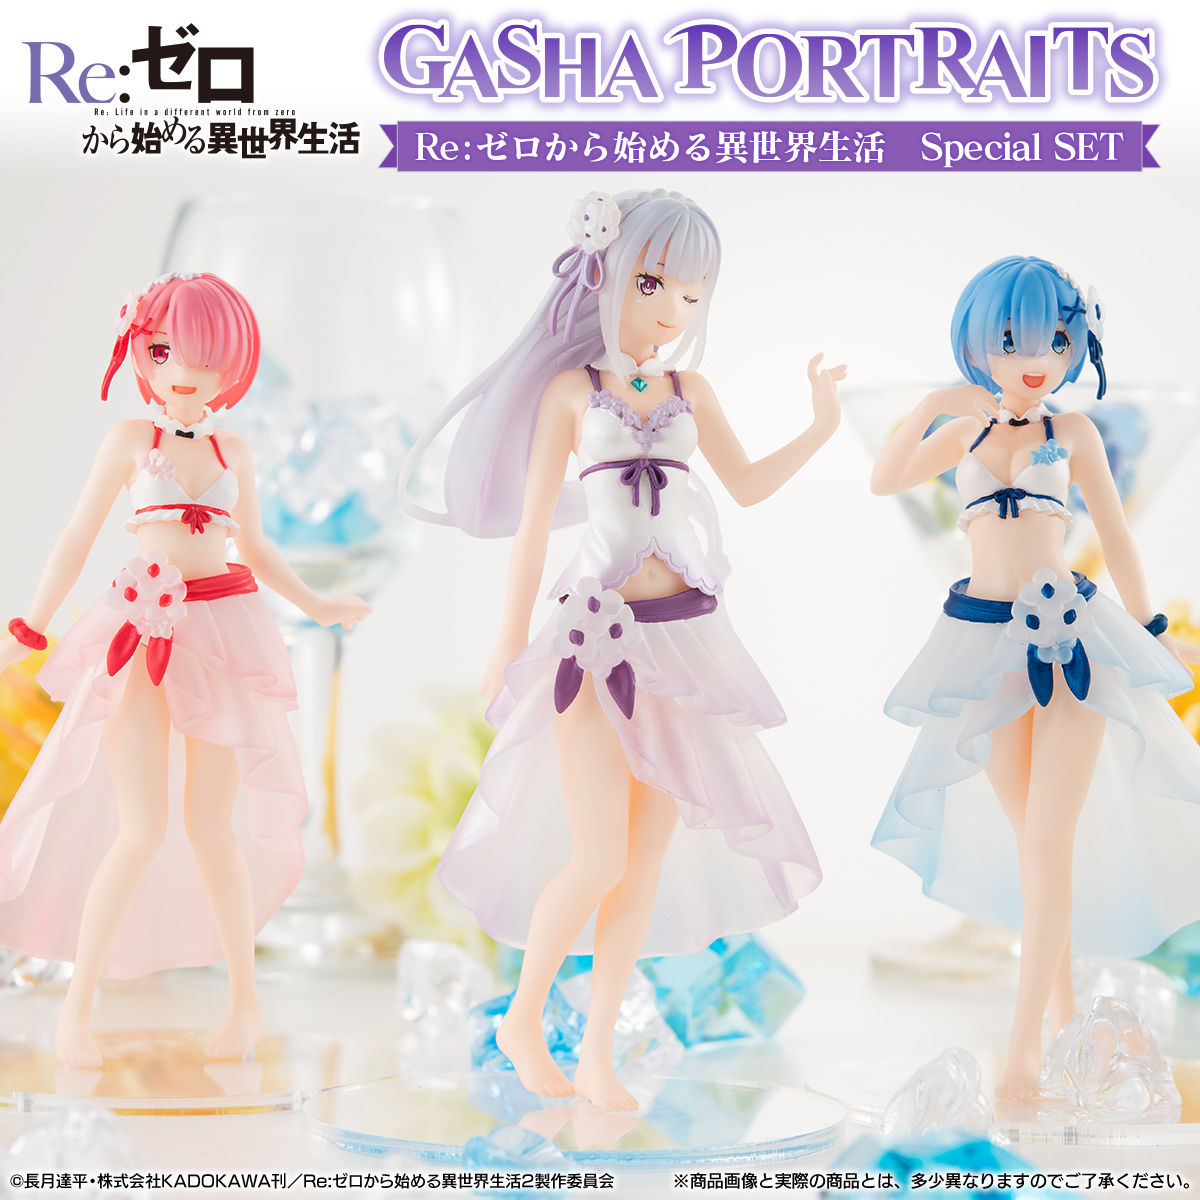 GashaPortraits Re：ゼロから始める異世界生活 Special SET 